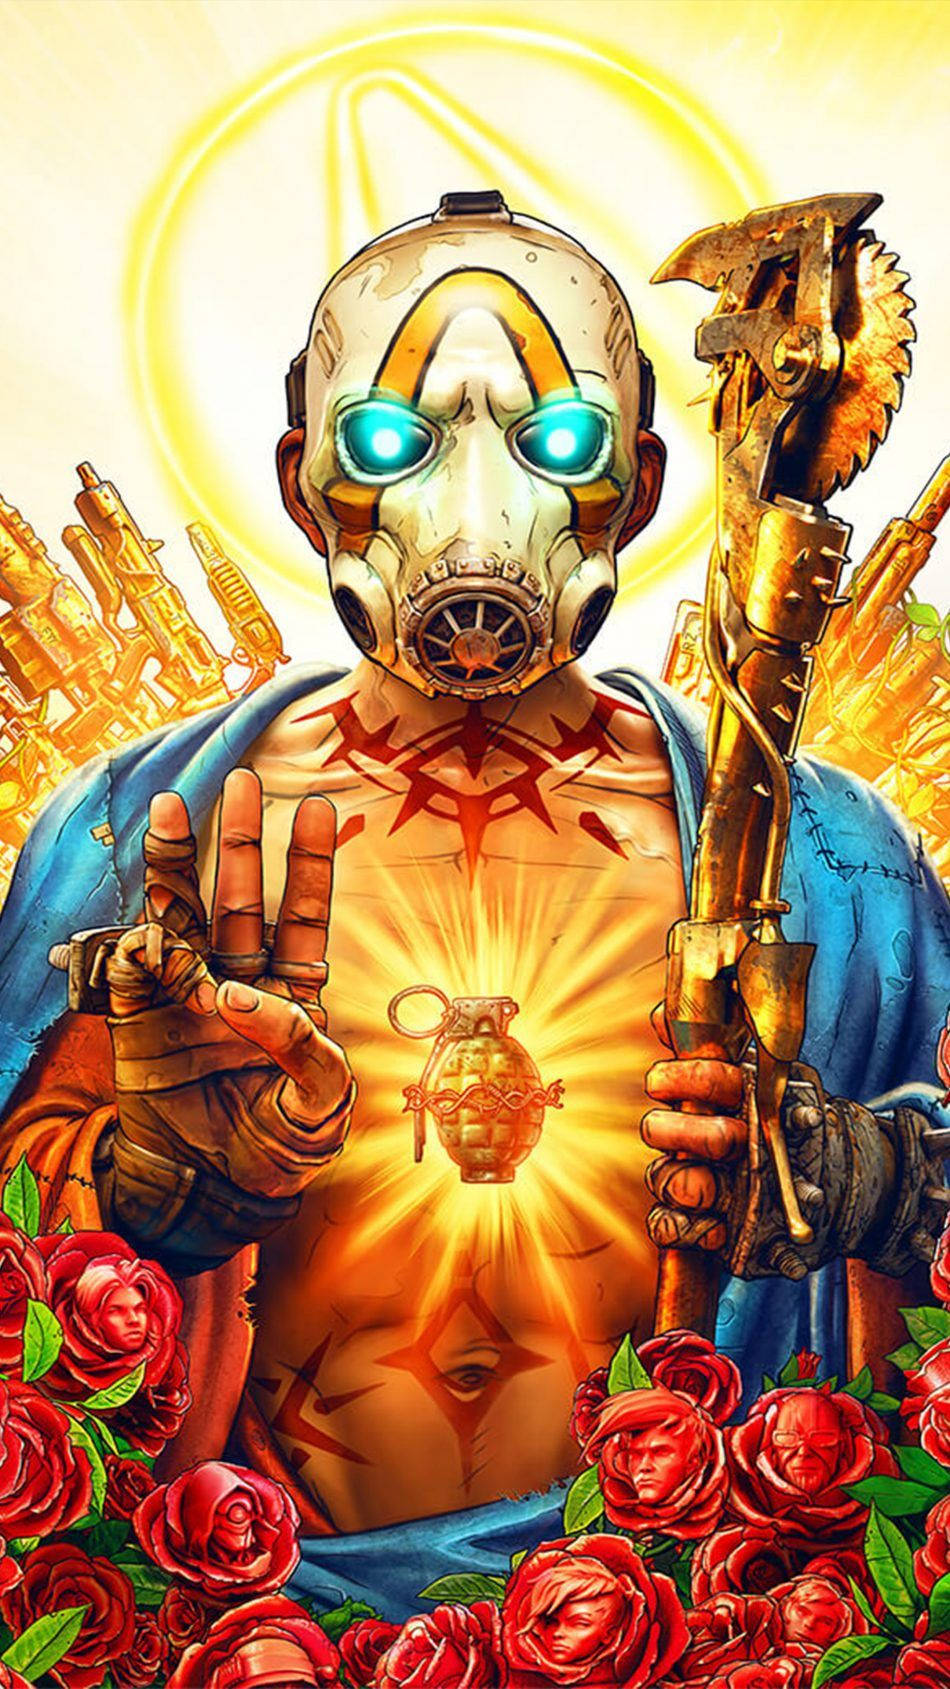 Get crazy and unleash your inner Psycho with Borderlands Wallpaper